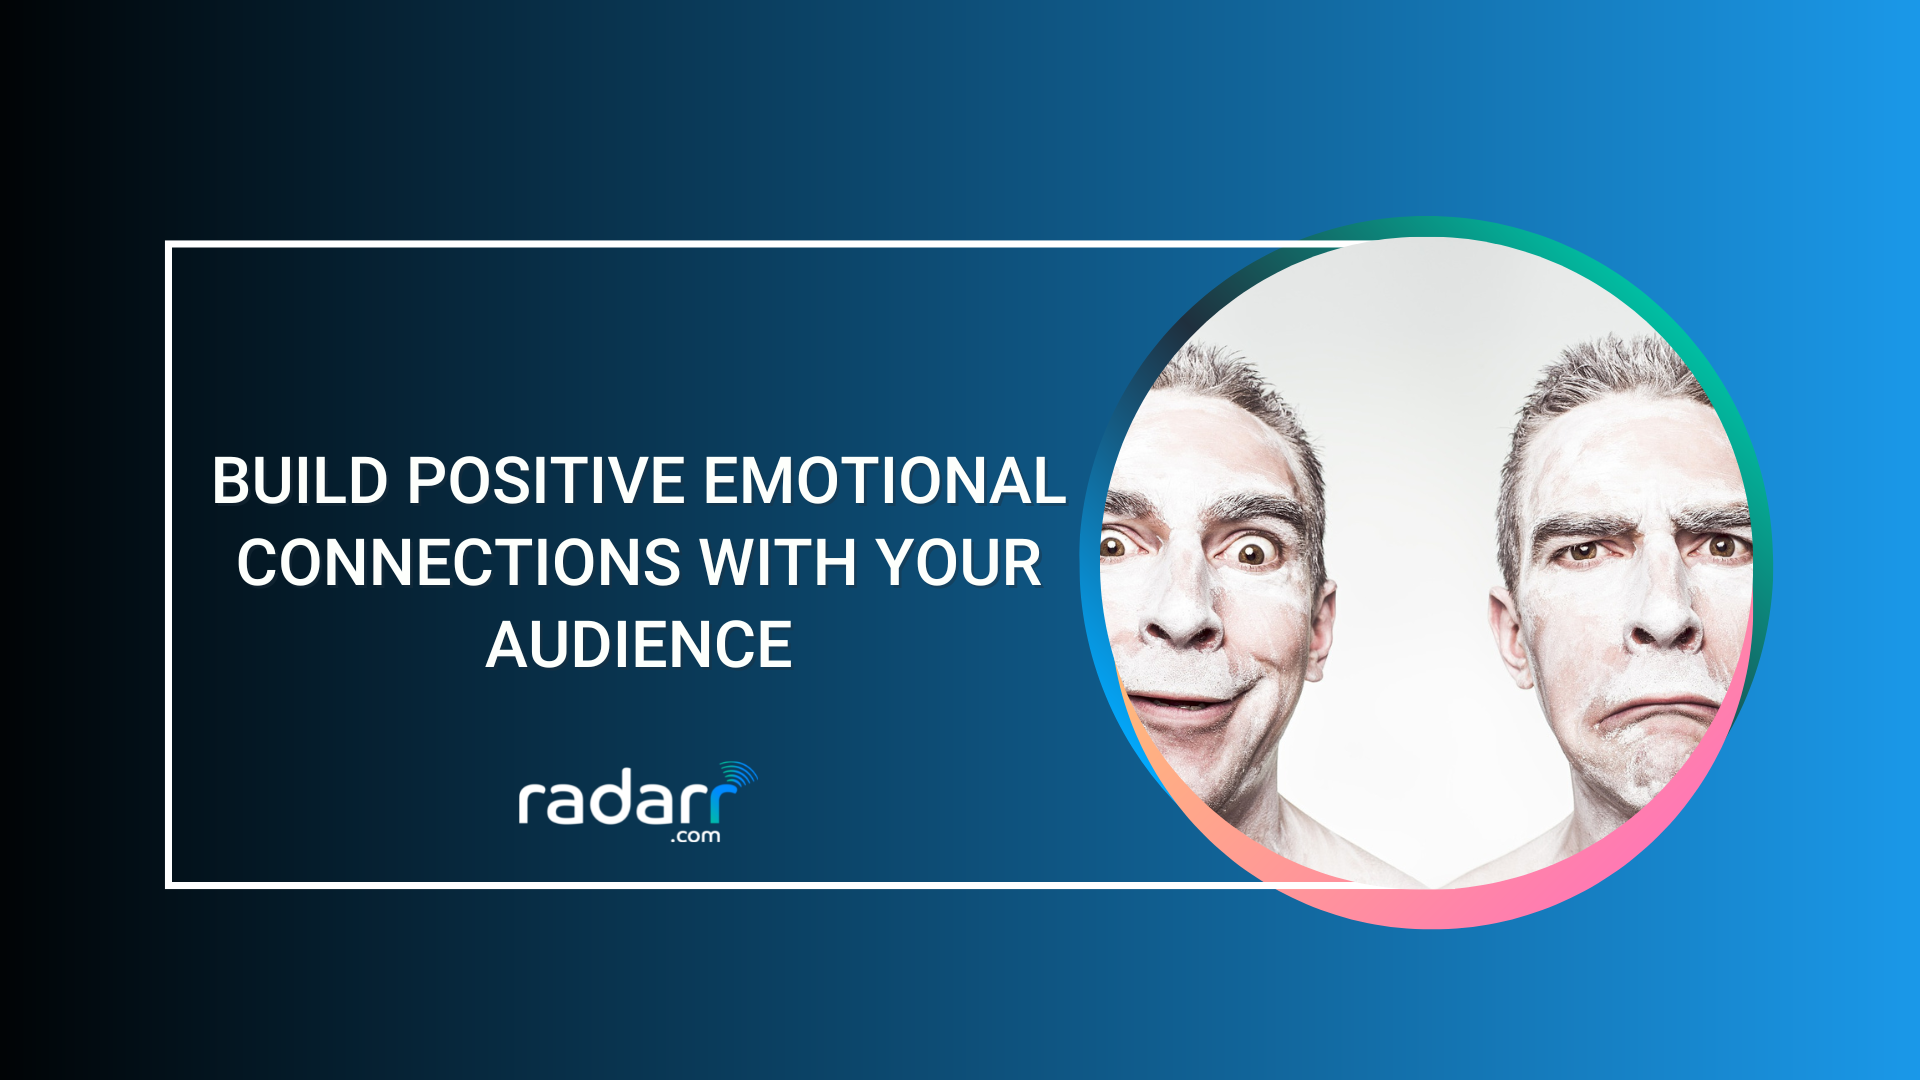 emotion marketing - ways to build positive connections with your social audience